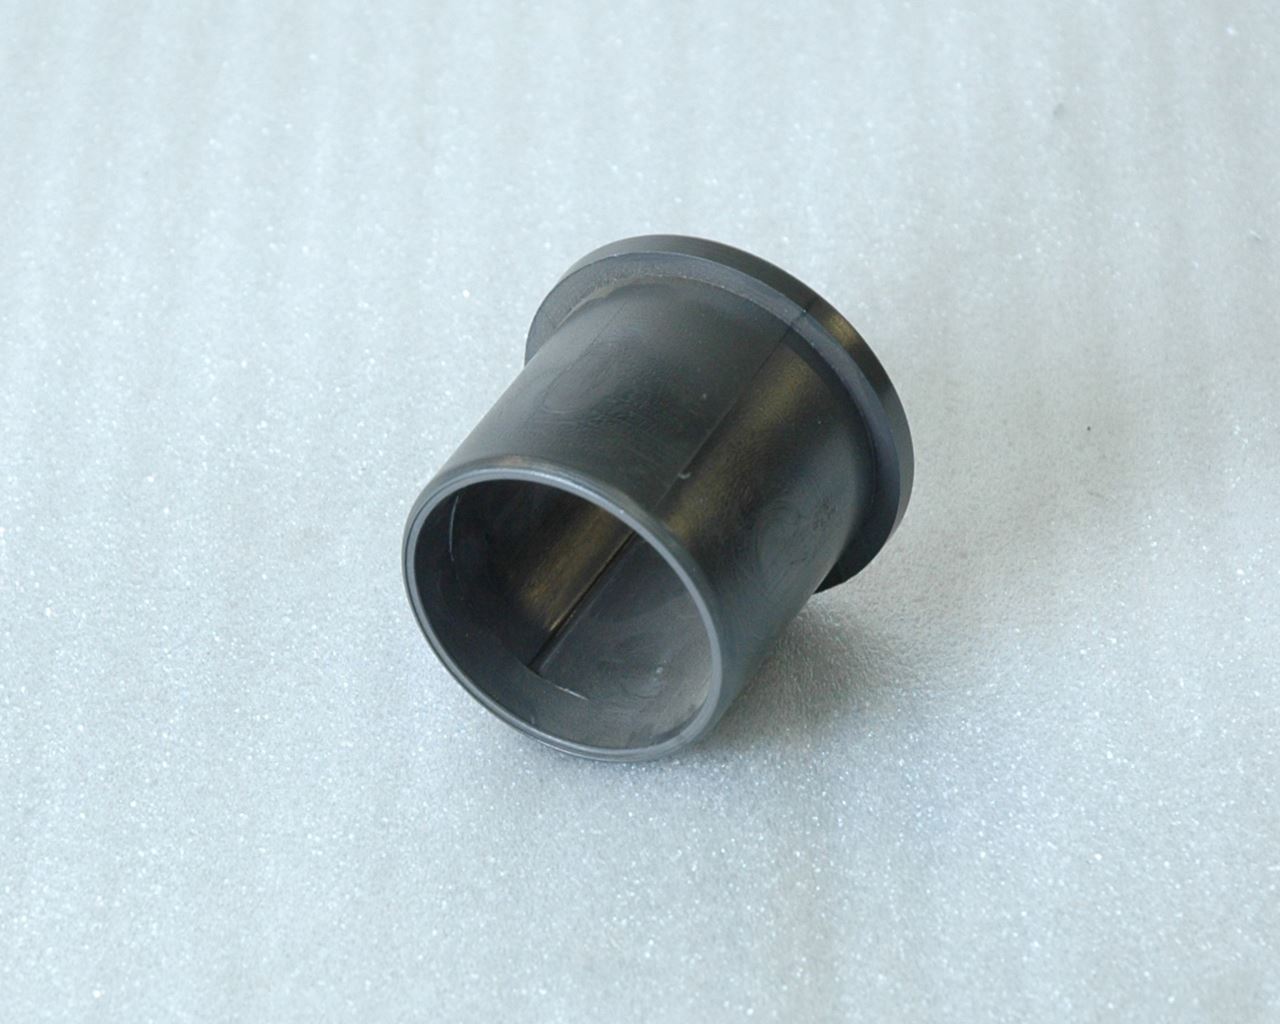 Lift table spare part - Bearing, Flange (POM) 50/60/70x50